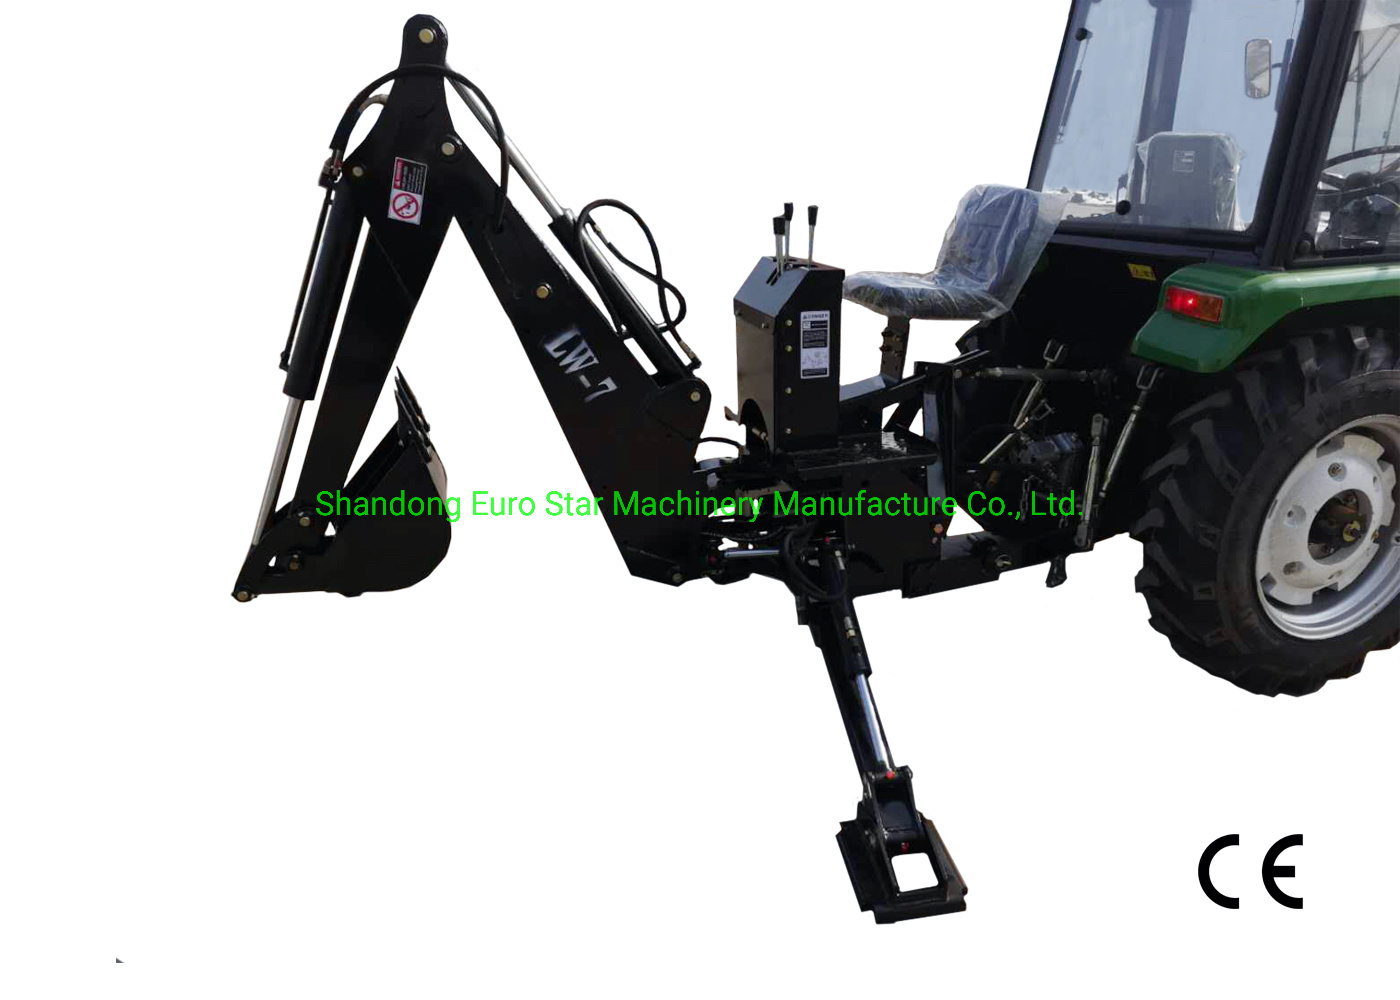 Lw-7-Backhoe-Small-Mini-Wheel-Farm-Tractor-Gasoline-and-Deisel-Excavator-Pto-Driven-Land-Construction-Backhoe-Loader-25-45HP-Agricultural-Machinery (2).jpg